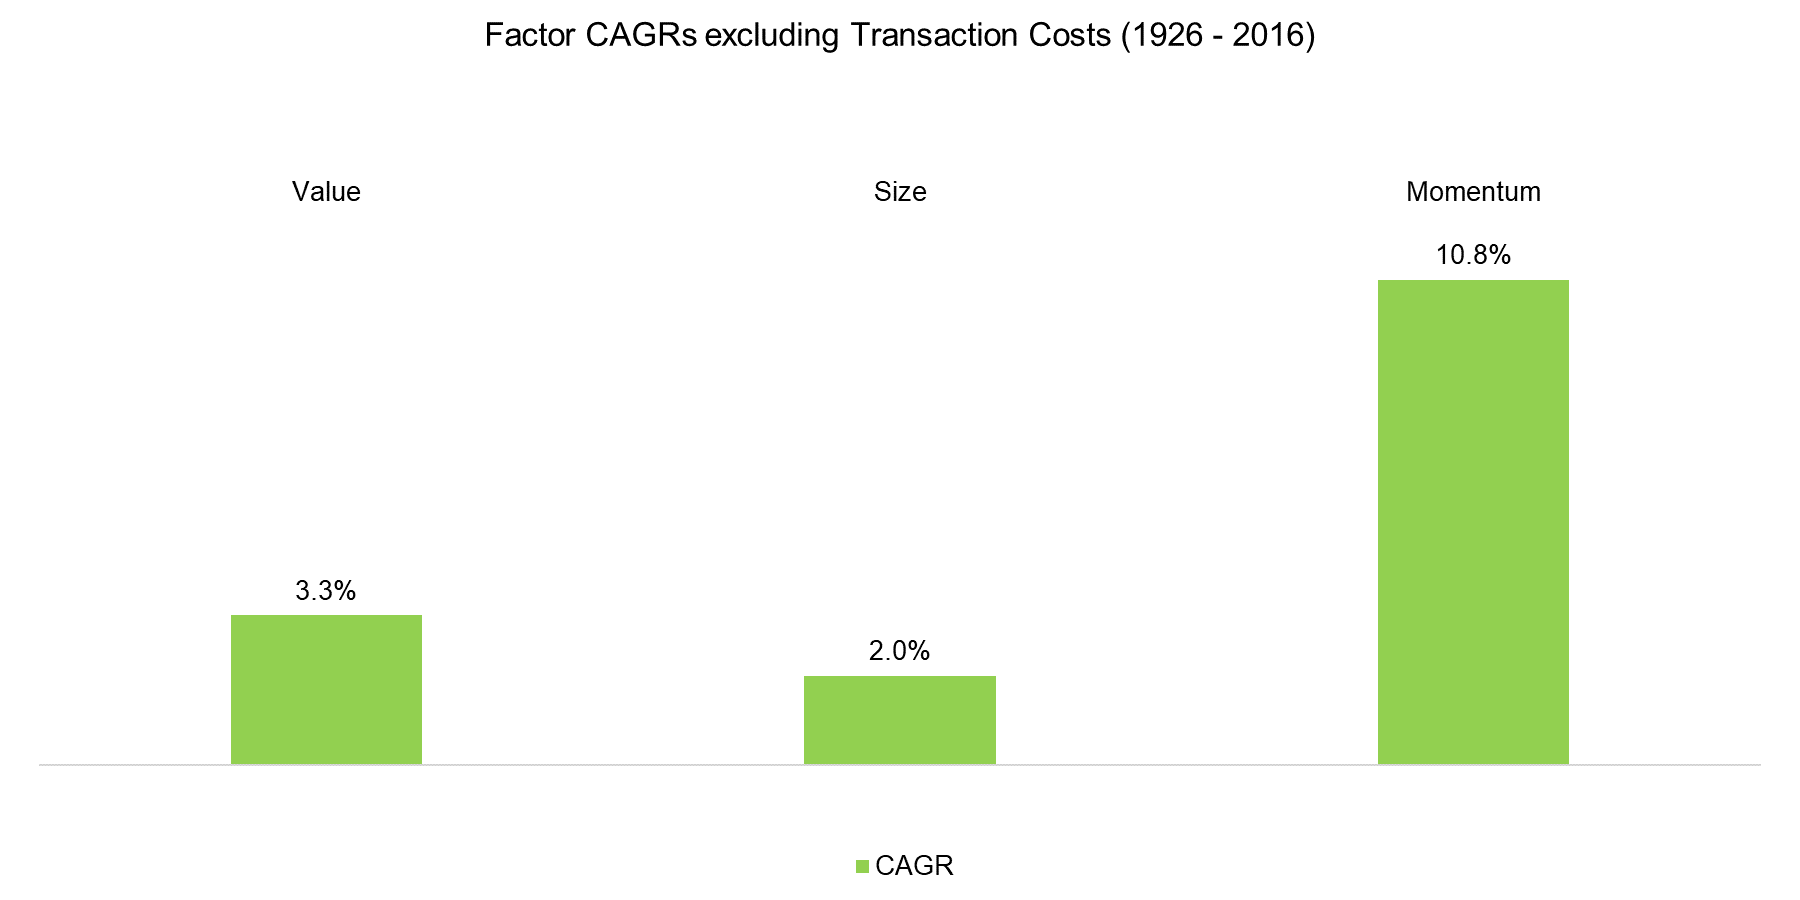 Factor CAGRs excluding Transaction Costs (1926 - 2016)